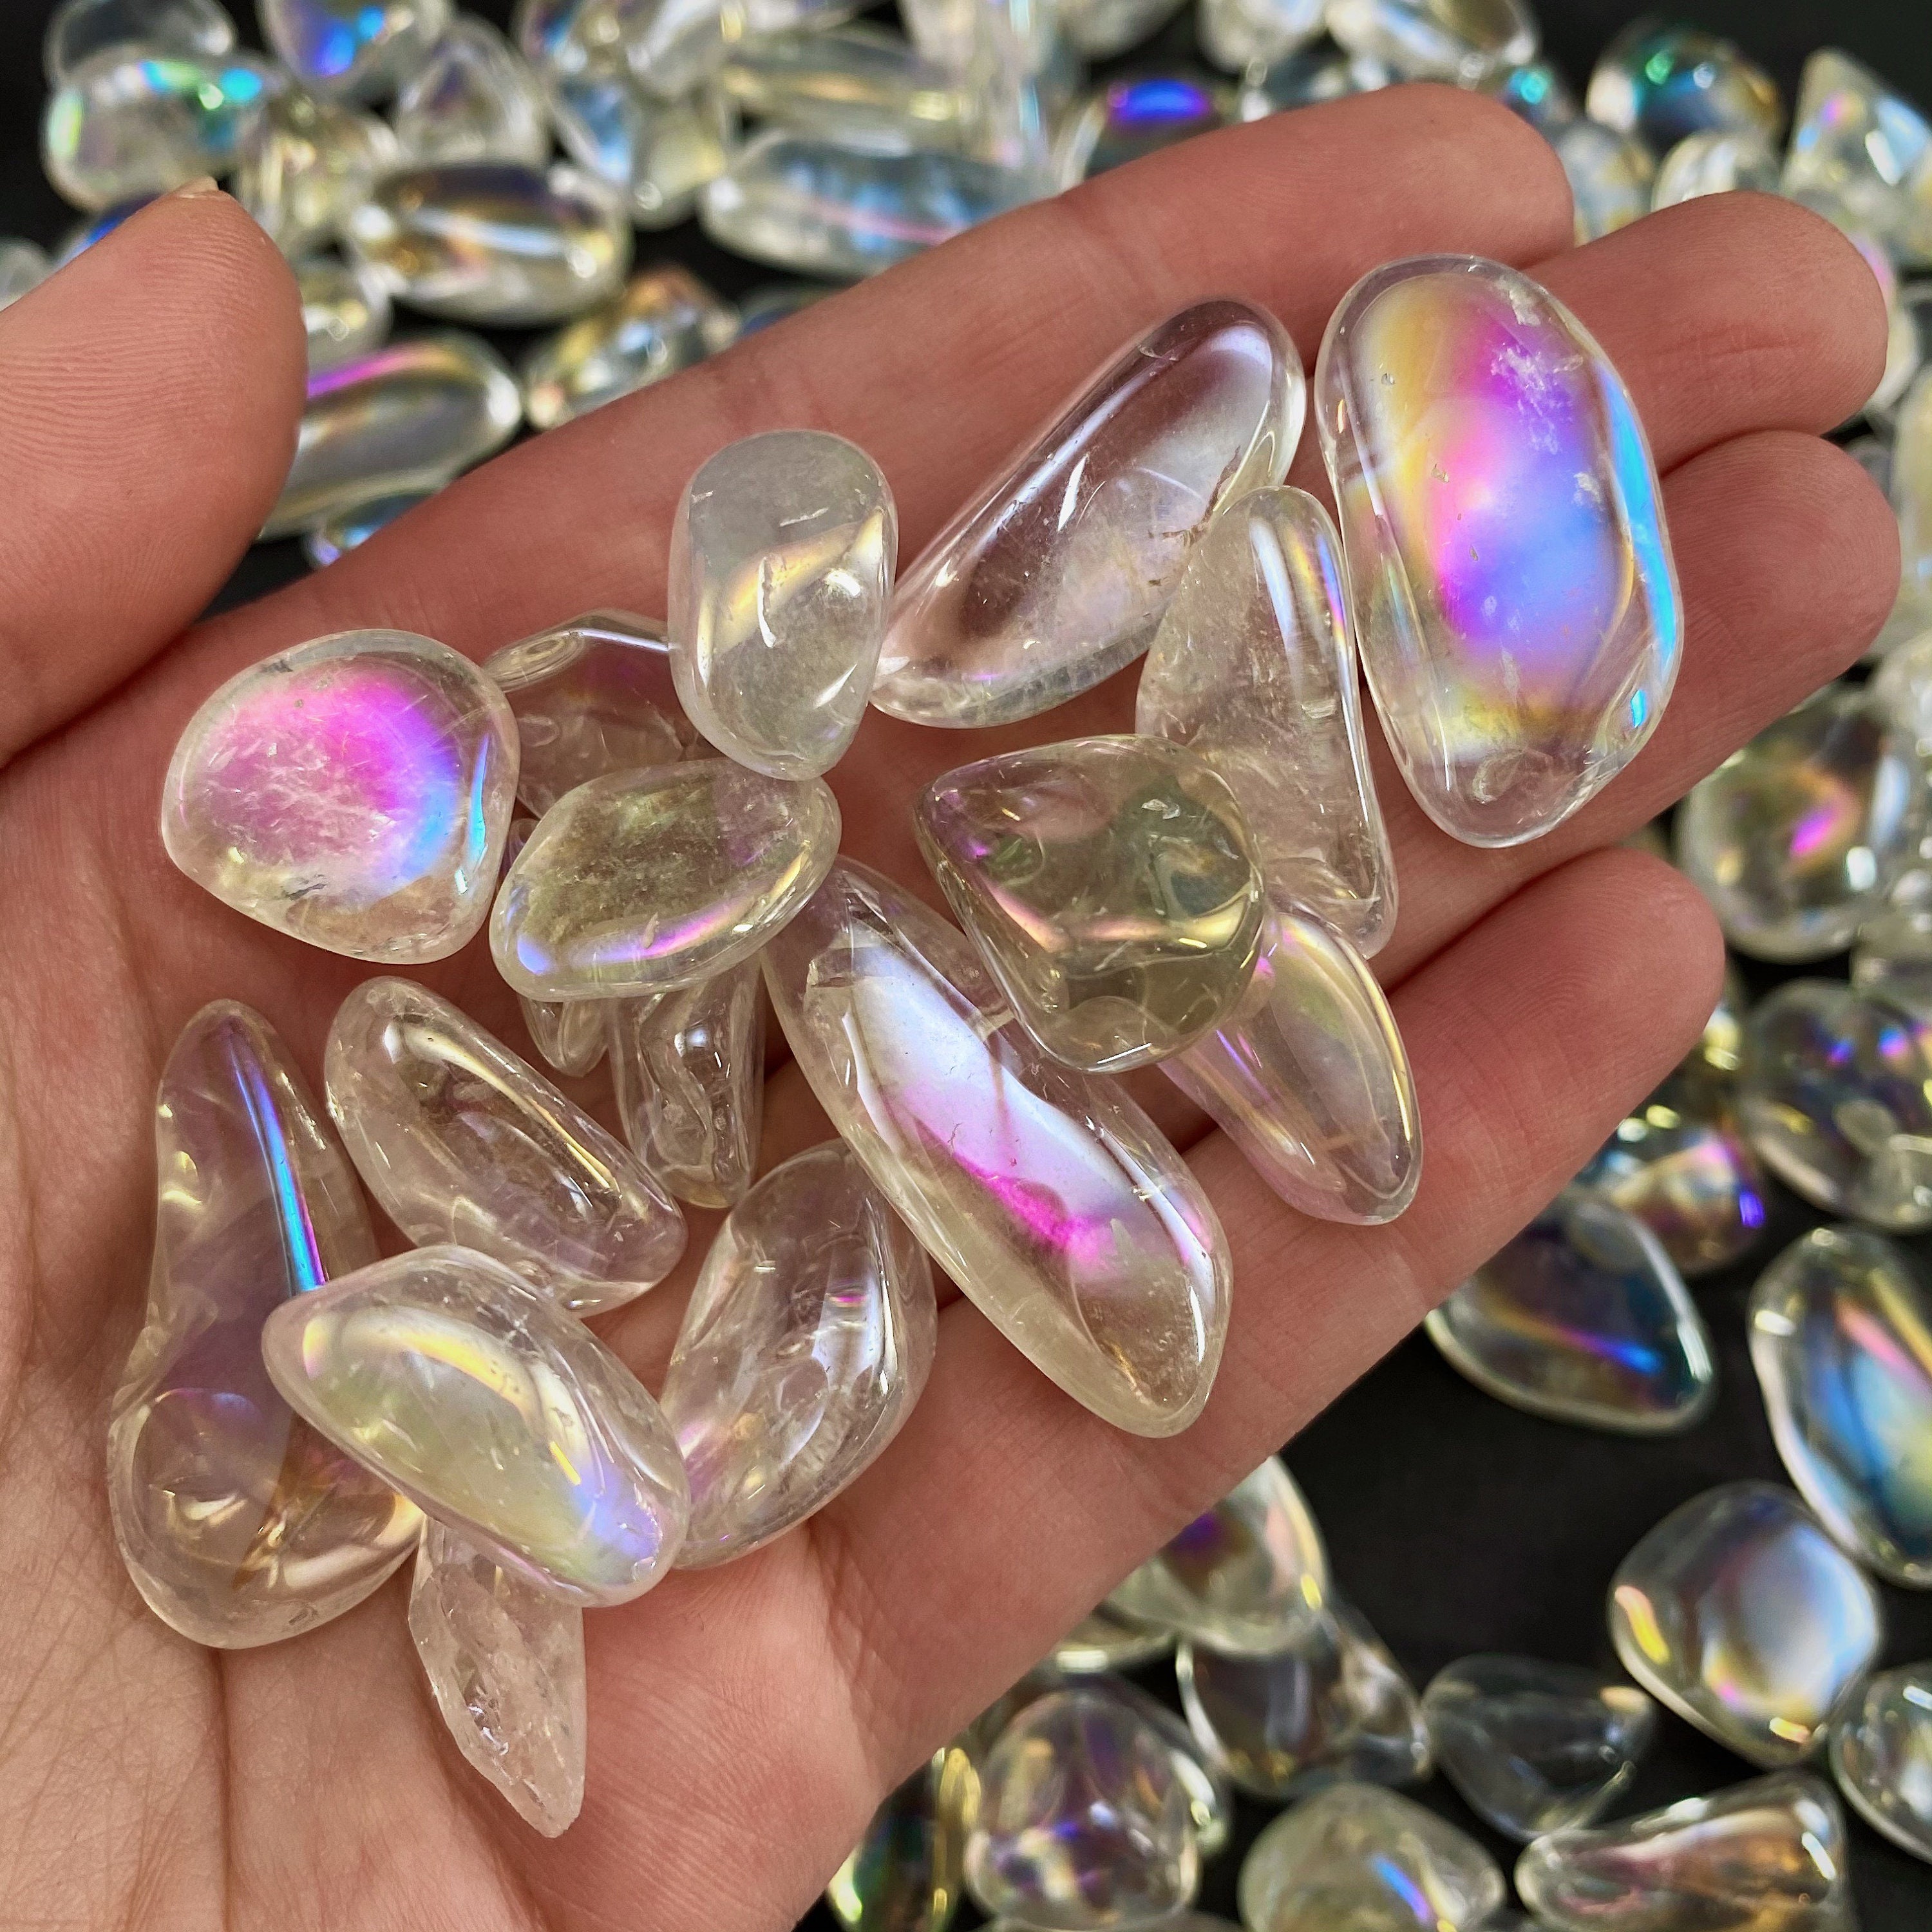 FLOAPA Stone Crafts 100g Natural Rainbow Angel Aura Quartz Crystals Tumbled  Stones Primary Stones and Minerals (Color : Rose, Size : 20 30mm)